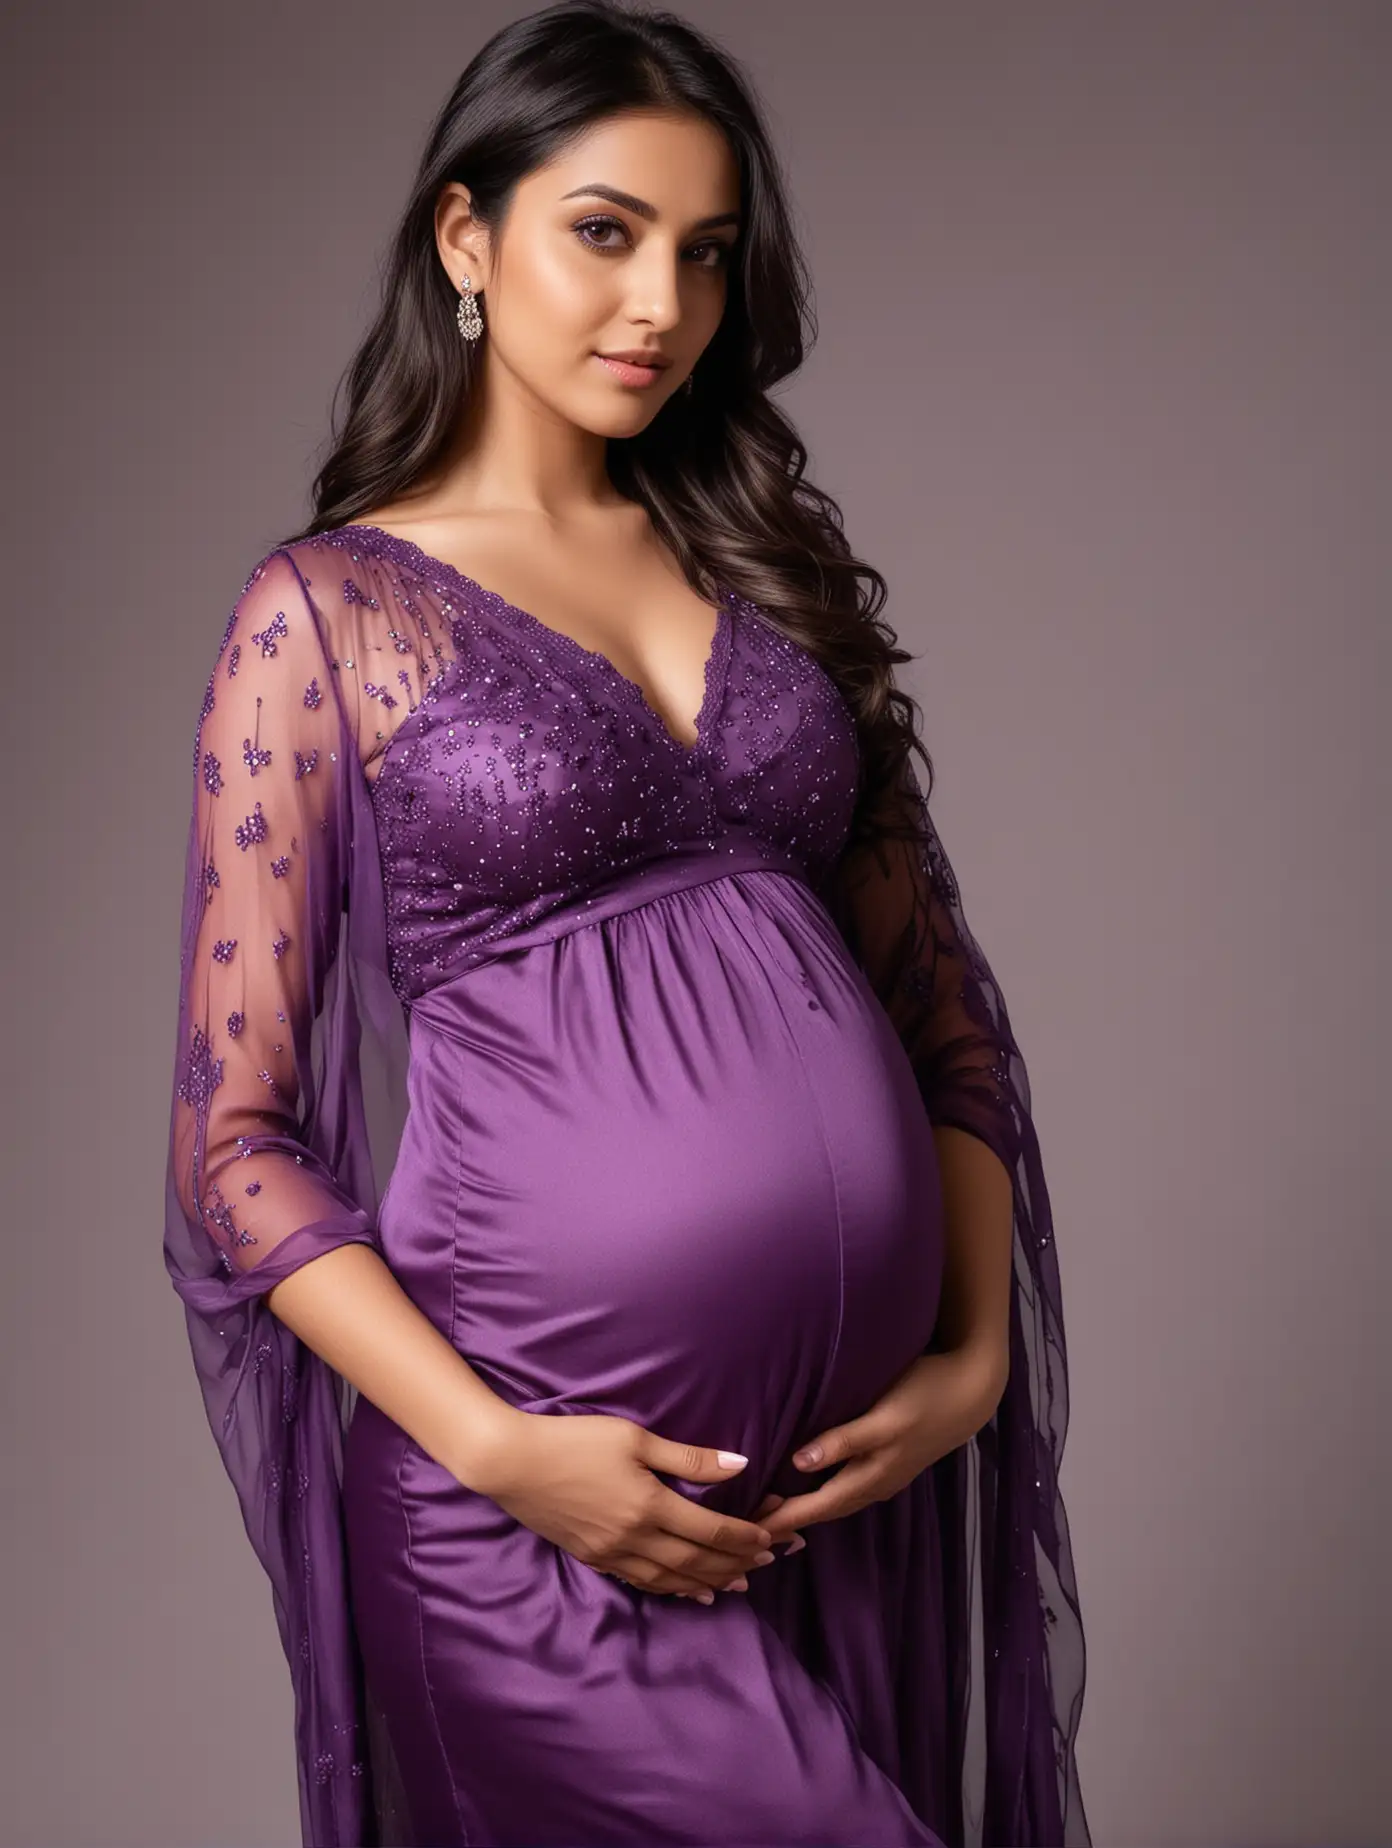 Sexy  India girl ,Exquisite facial features ，beautiful pregnant woman in purple satin dress with sheer sleeves，full body photo，she has dark brown hair and is looking into camera